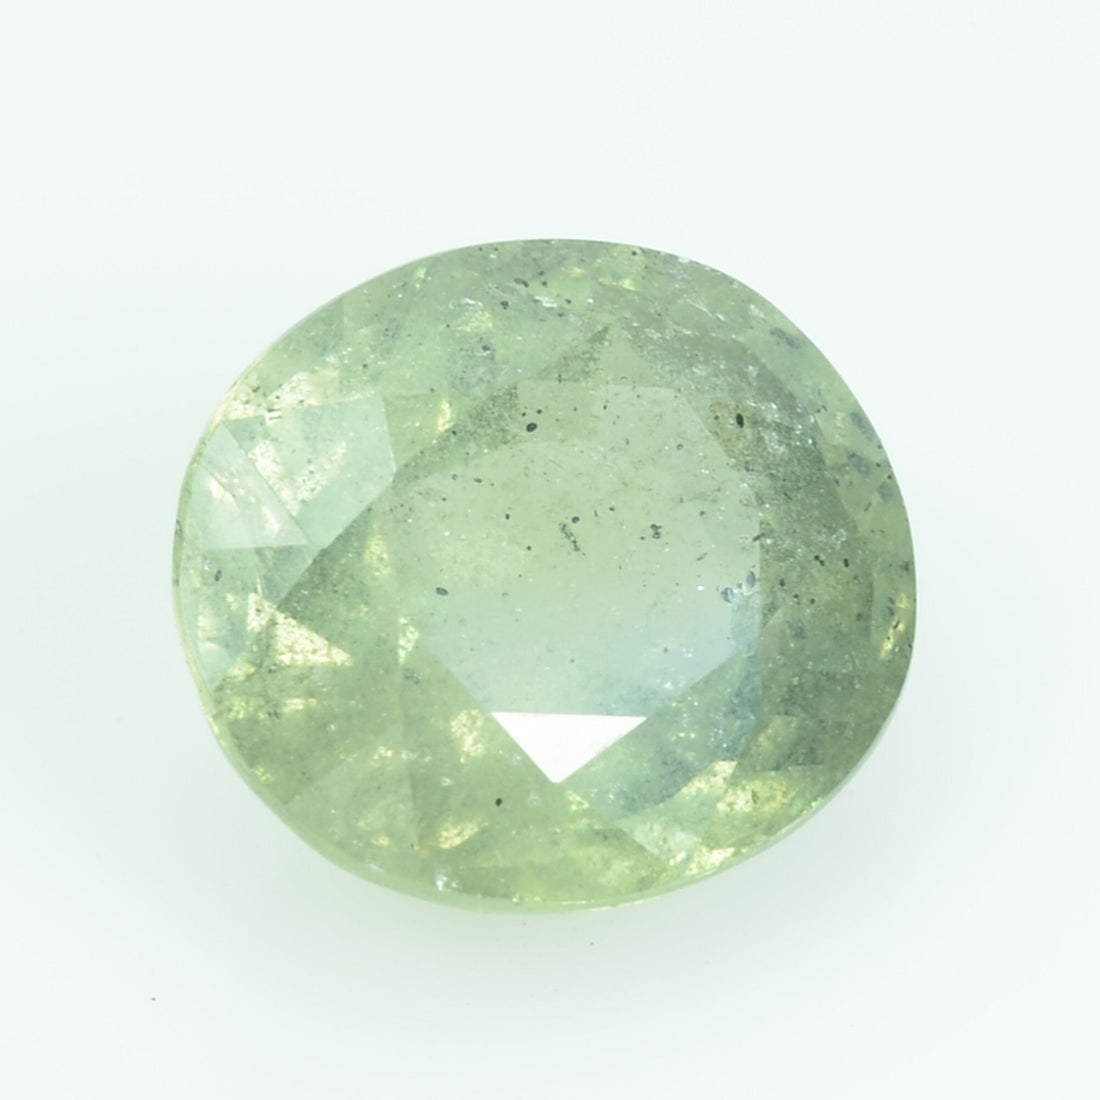 4.70 Cts Natural Green Sapphire Loose Gemstone Oval Cut